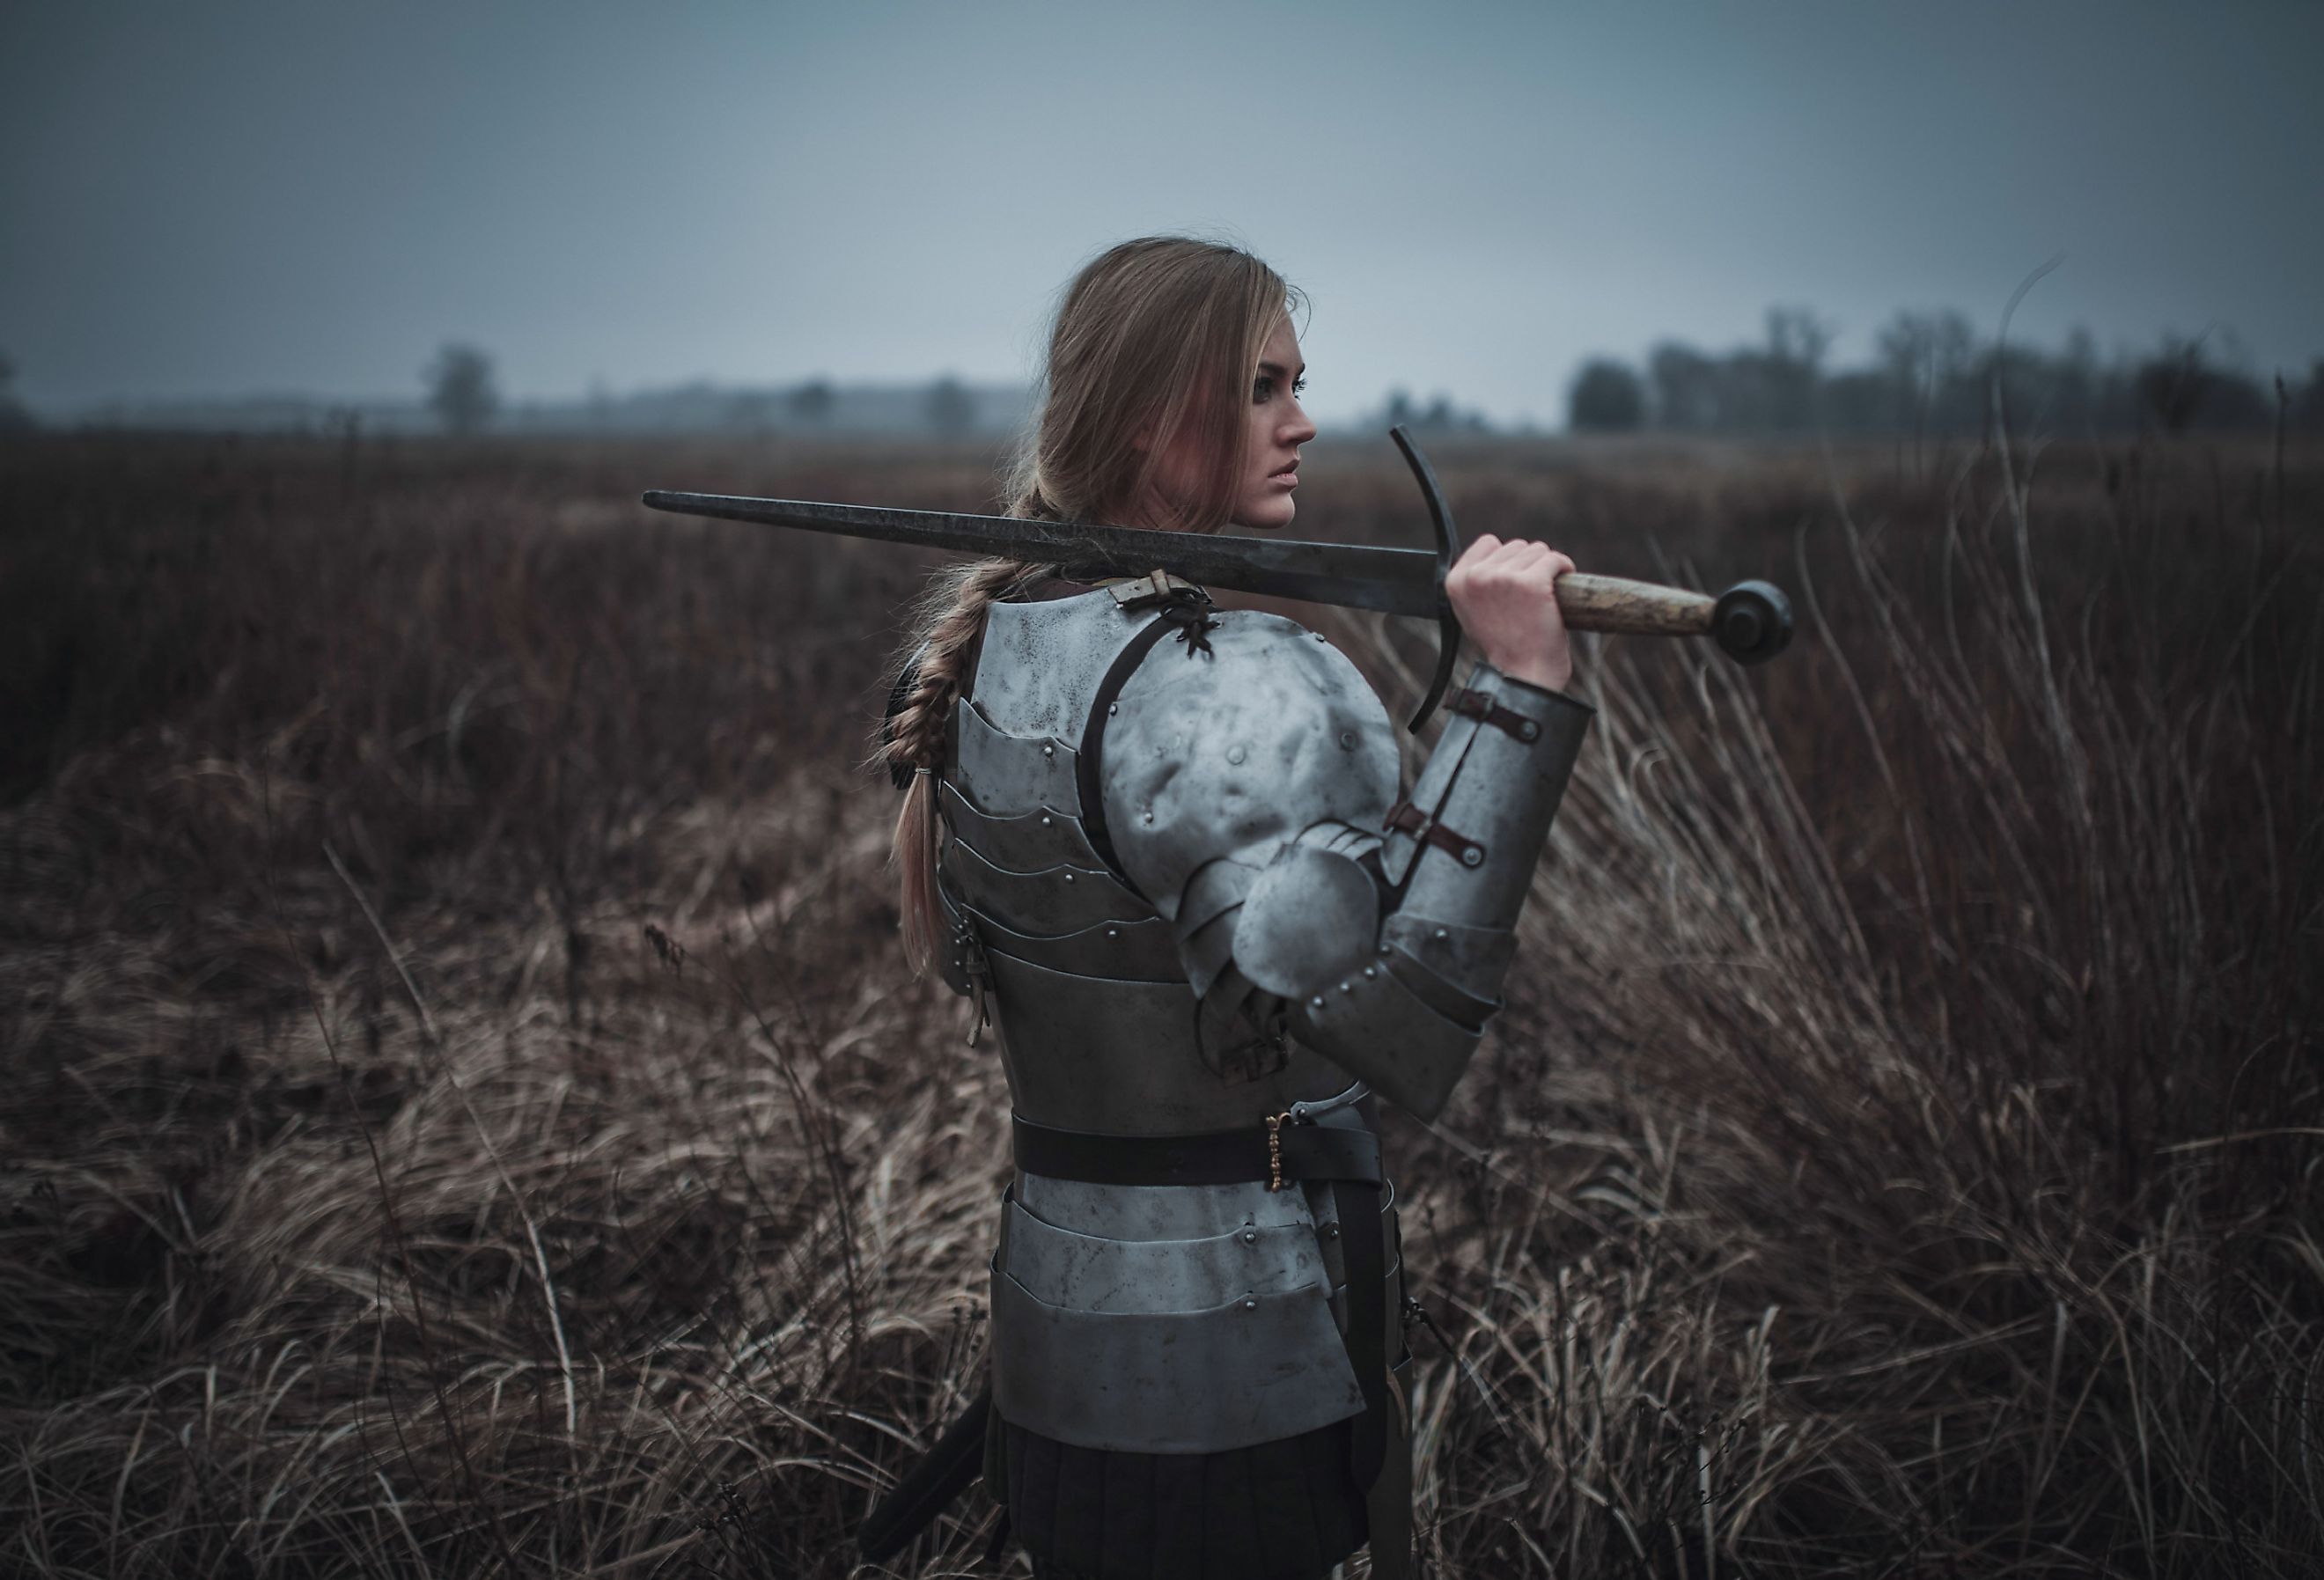 Depiction of Joan of Arc, one of the greatest women warriors in history. Image credit Stasia04 via Shutterstock